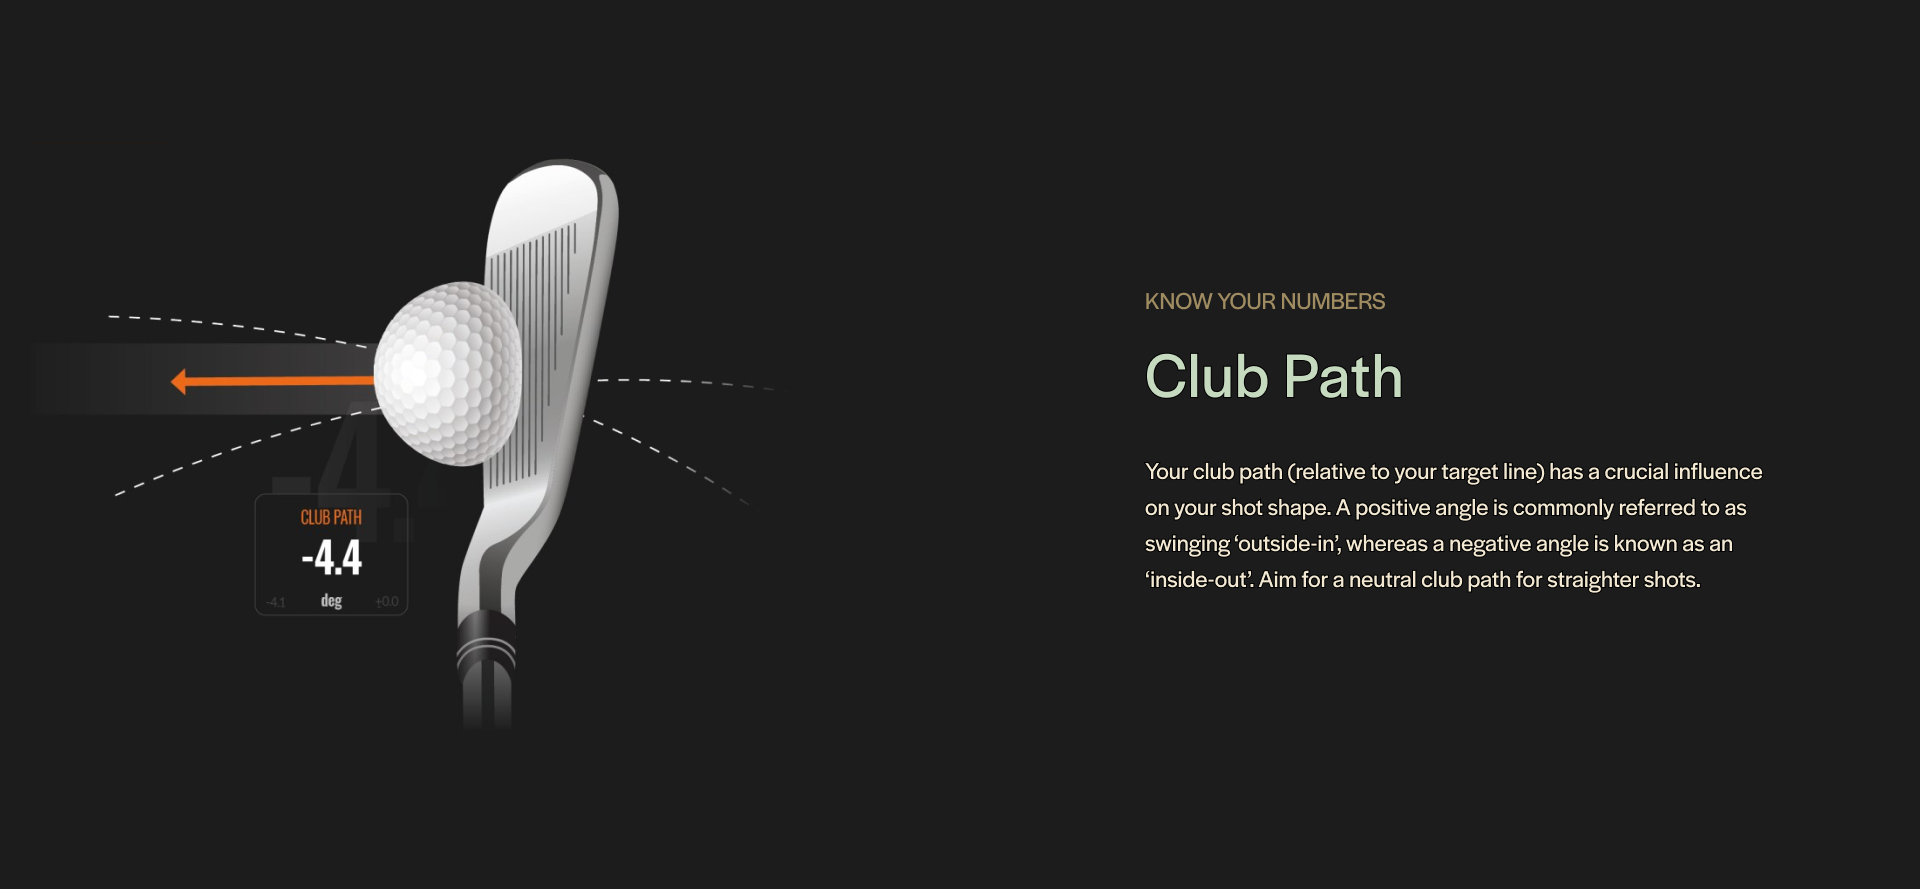 Your club path has a crucial influence on your shot shape. A positive angle is referred to as swinging "outside in," whereas a negative angle is an "inside out."